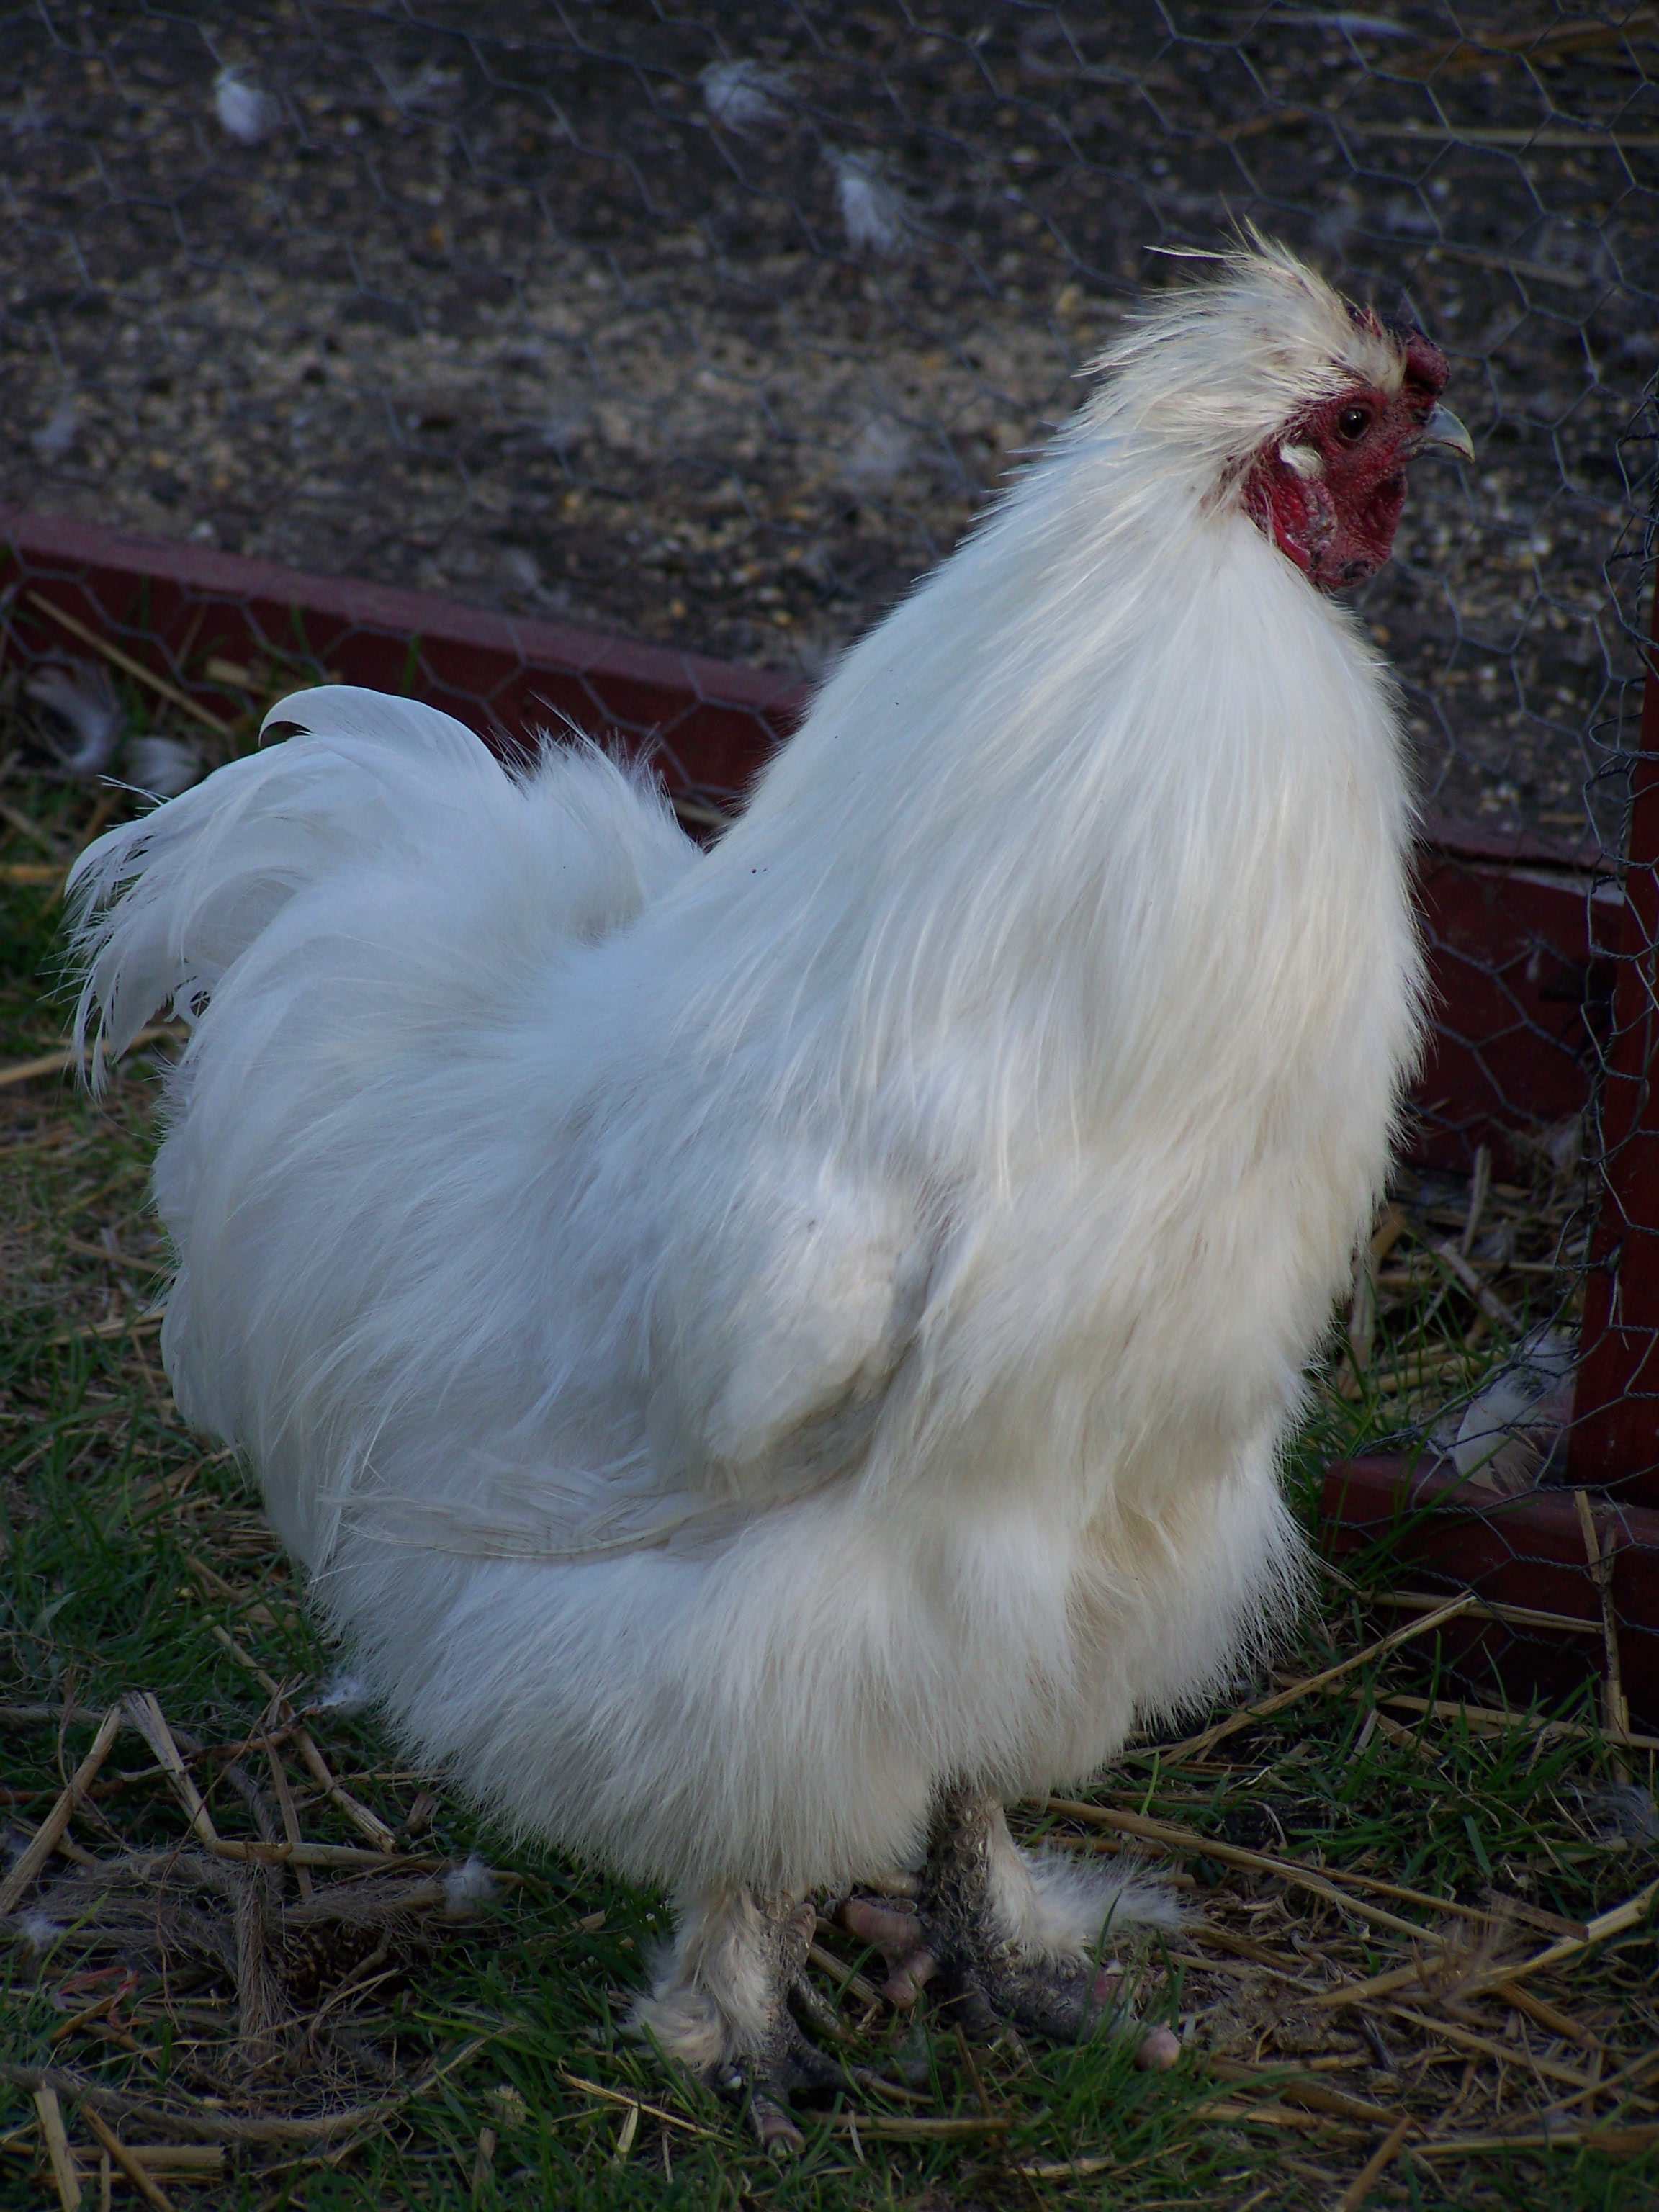 A friend of mine was moving and gave me "Fluffy" ...he is a silkie chicken who thinks he is a cat. Love him dearly